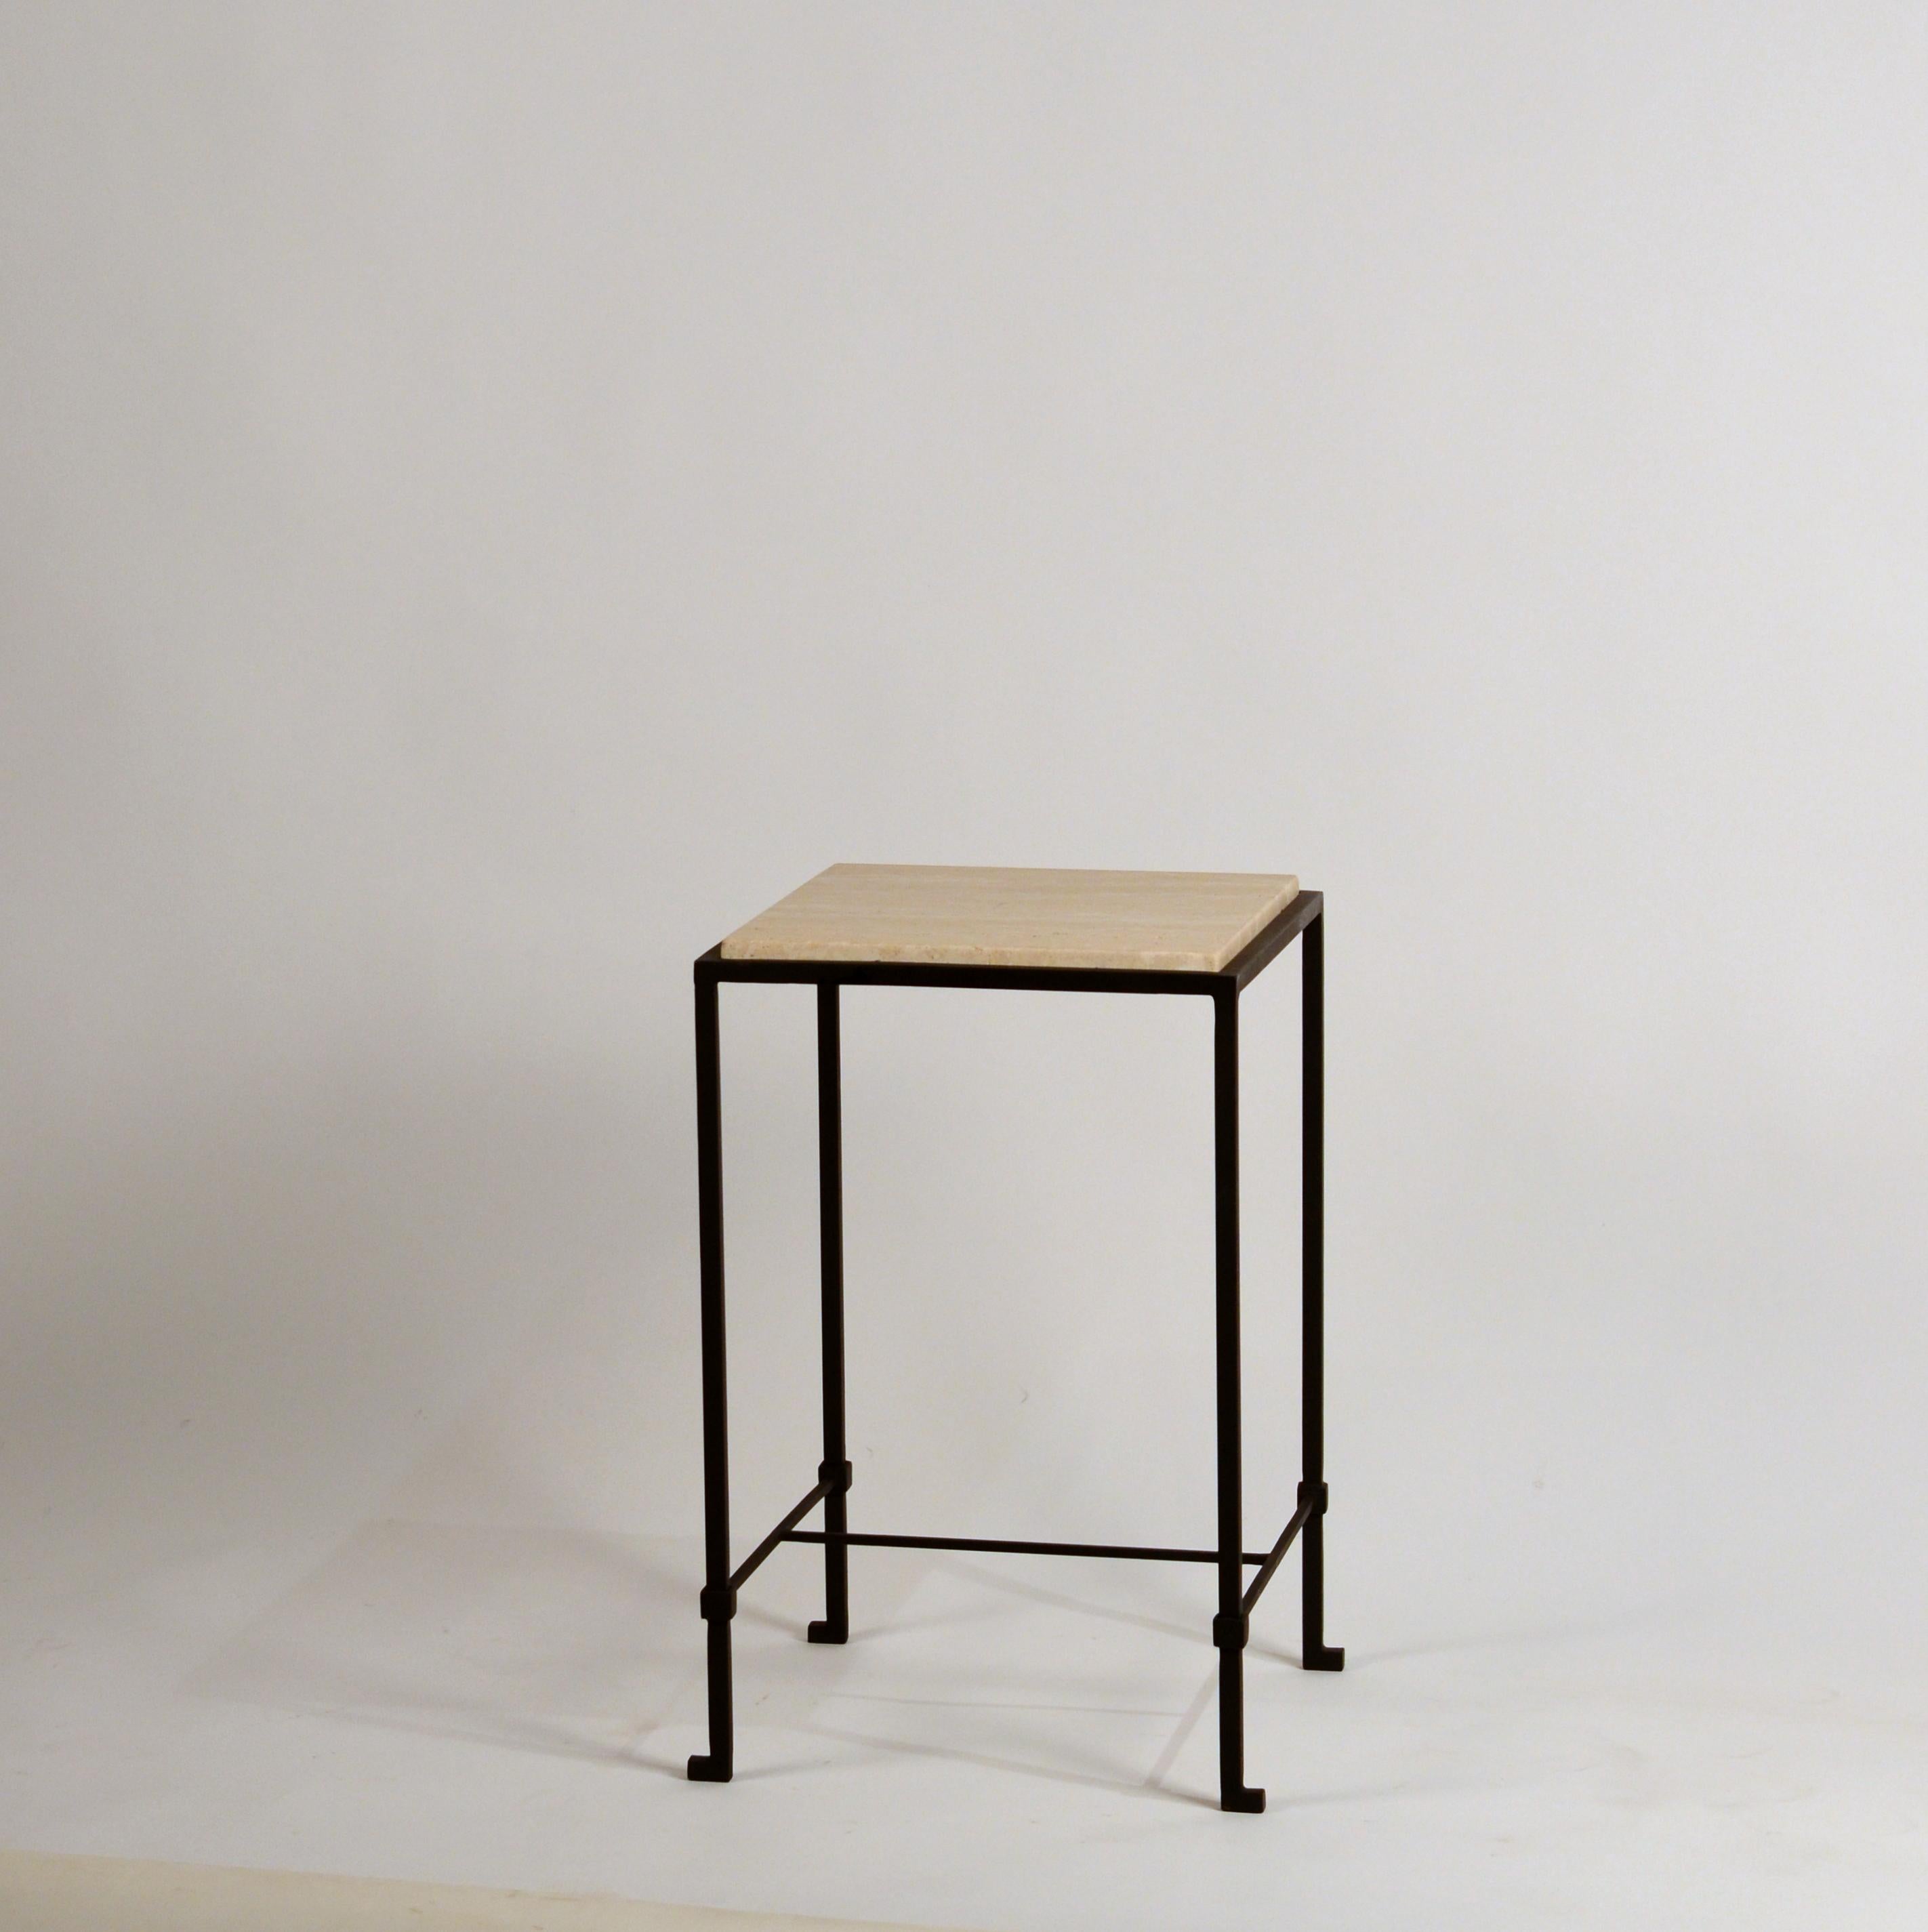 'Diagramme' Wrought Iron and Honed Travertine Drinks Table by Design Frères In New Condition For Sale In Los Angeles, CA